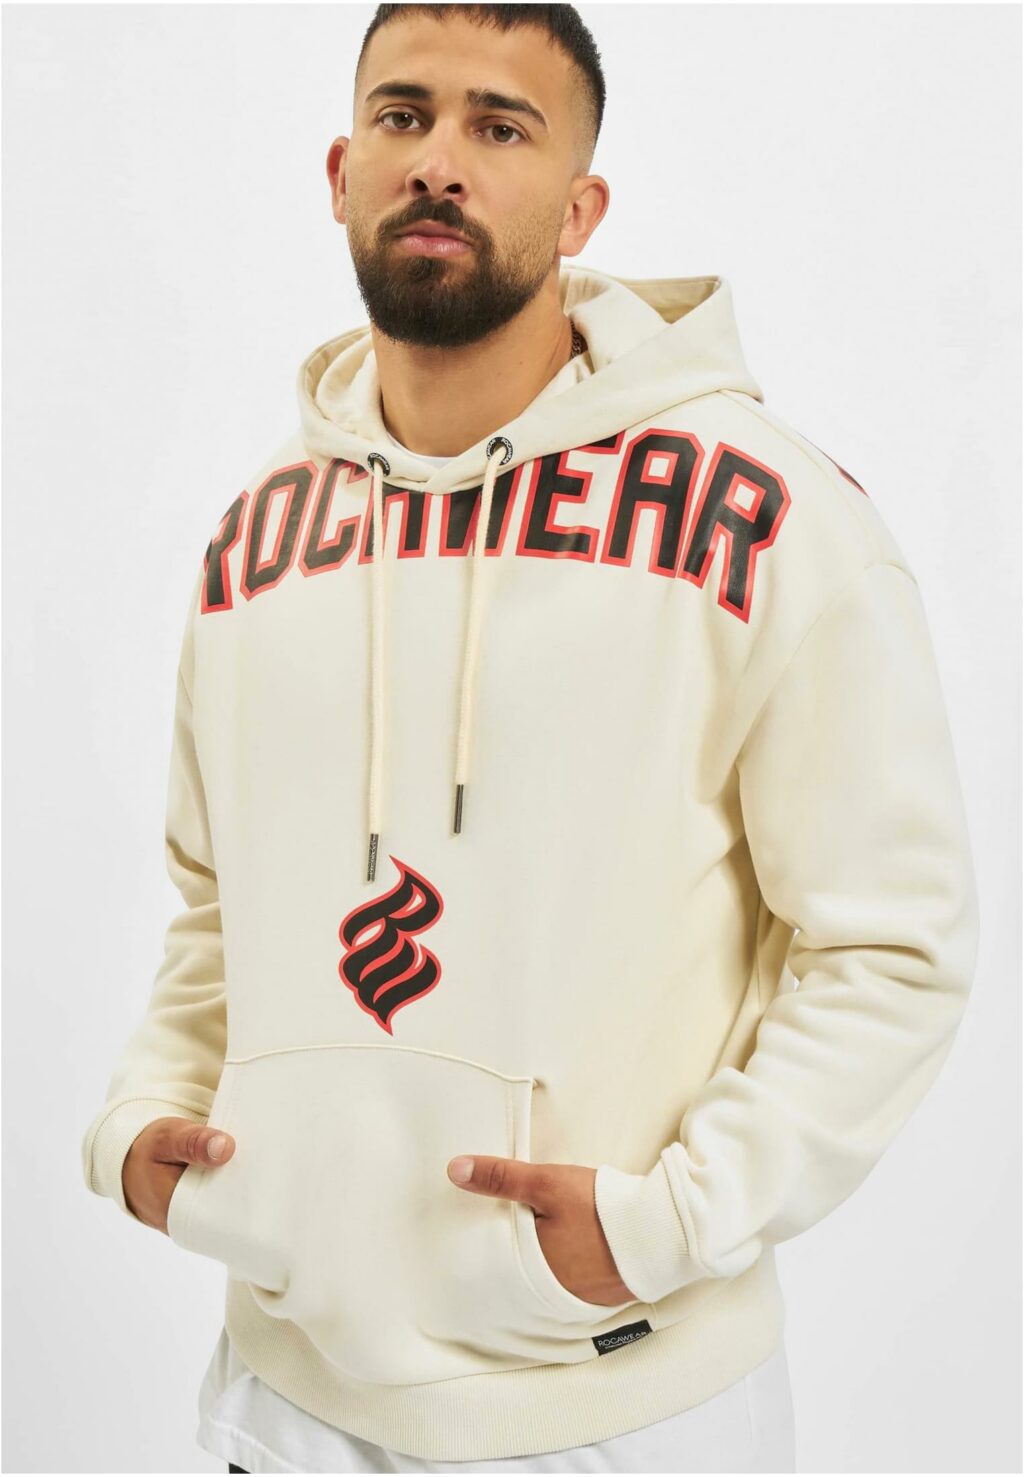 Rocawear Jefferson Hoody offwhite RWHD053